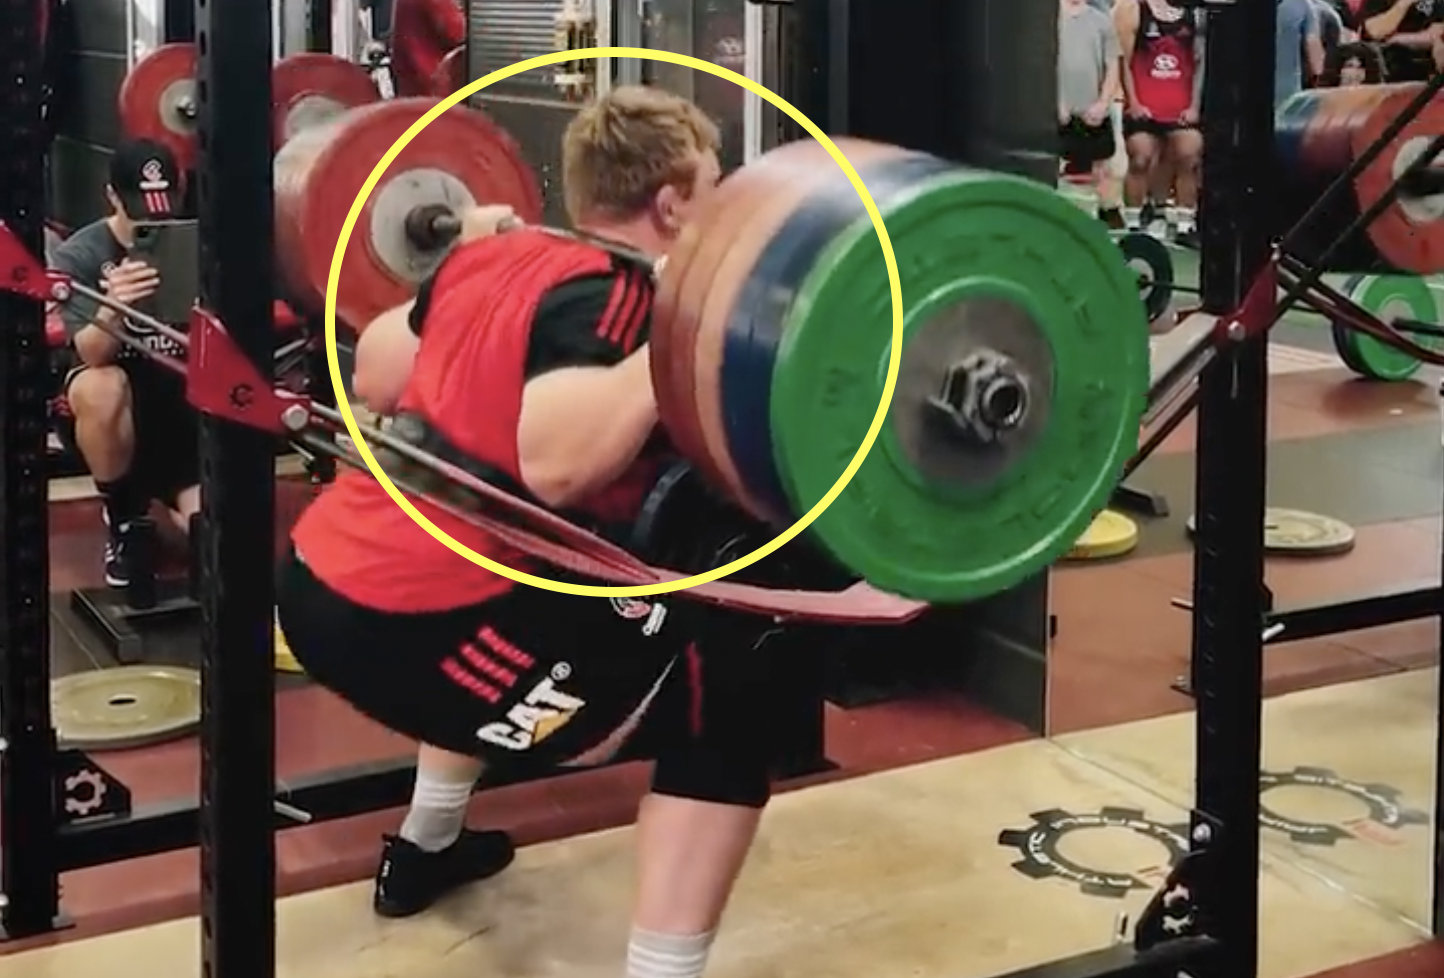 Wild scenes as Crusaders prop pulls off monster lift at gym